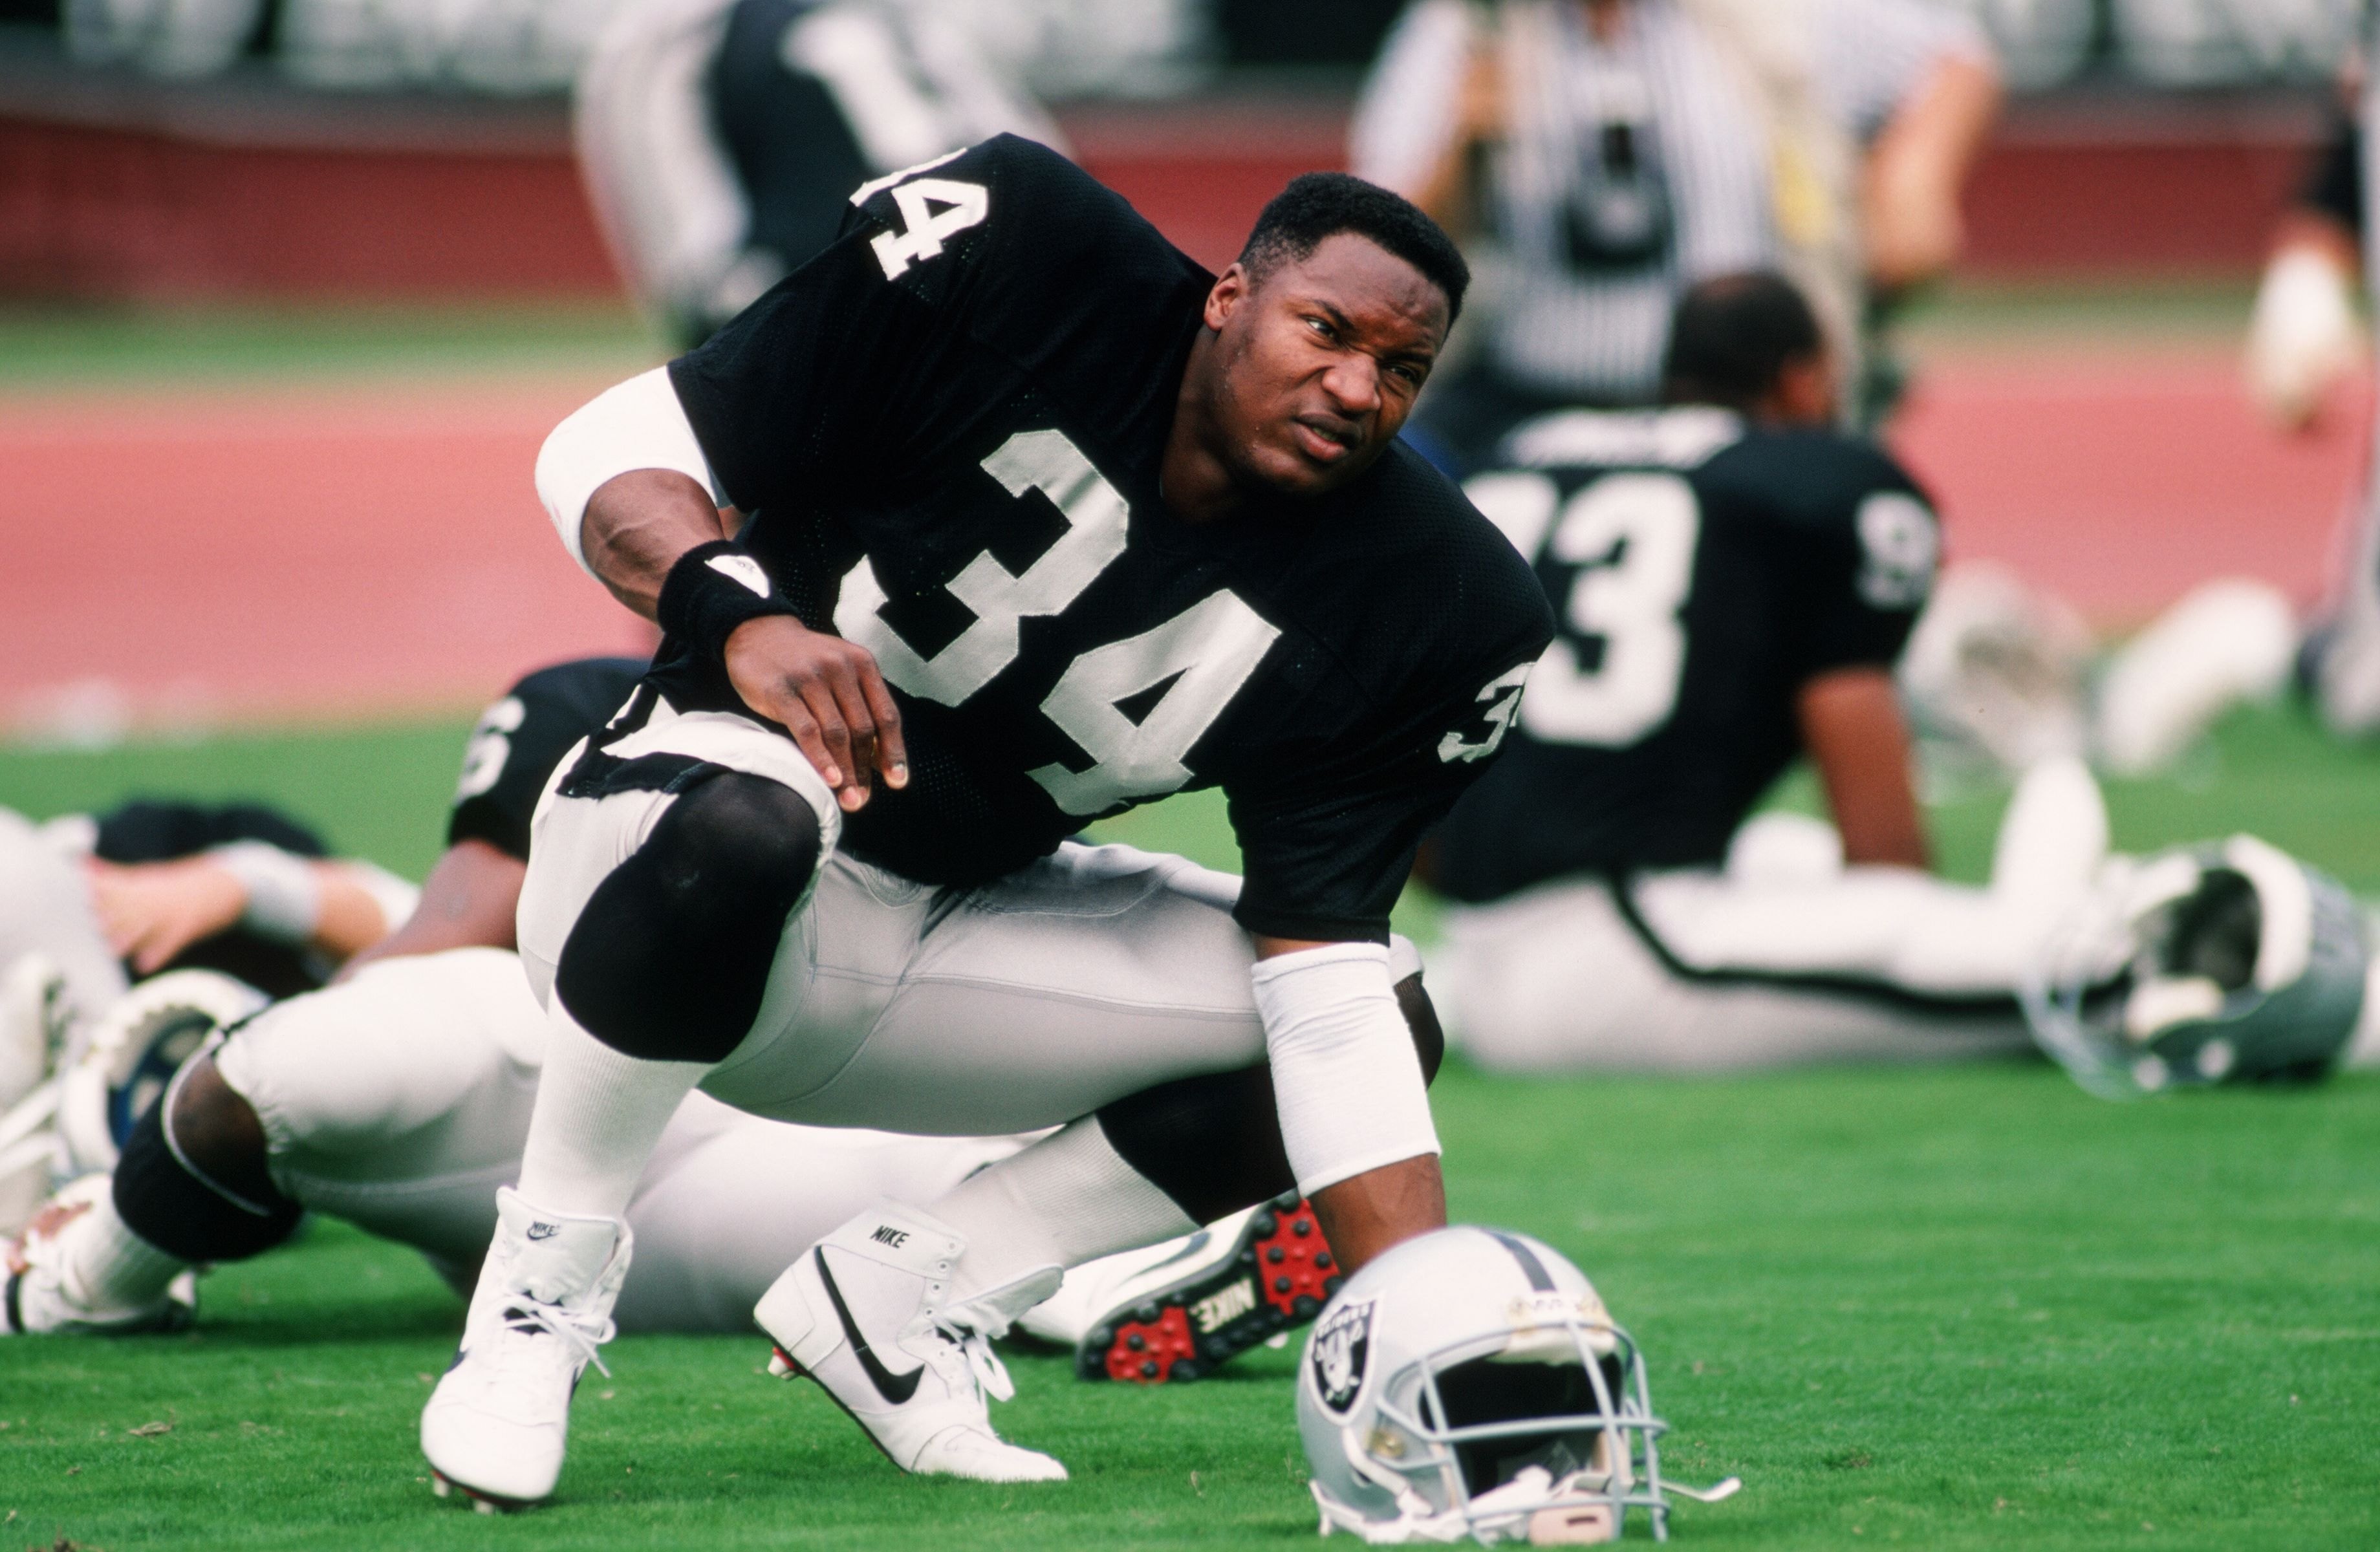 Former NFL running back Bo Jackson warming up before a game